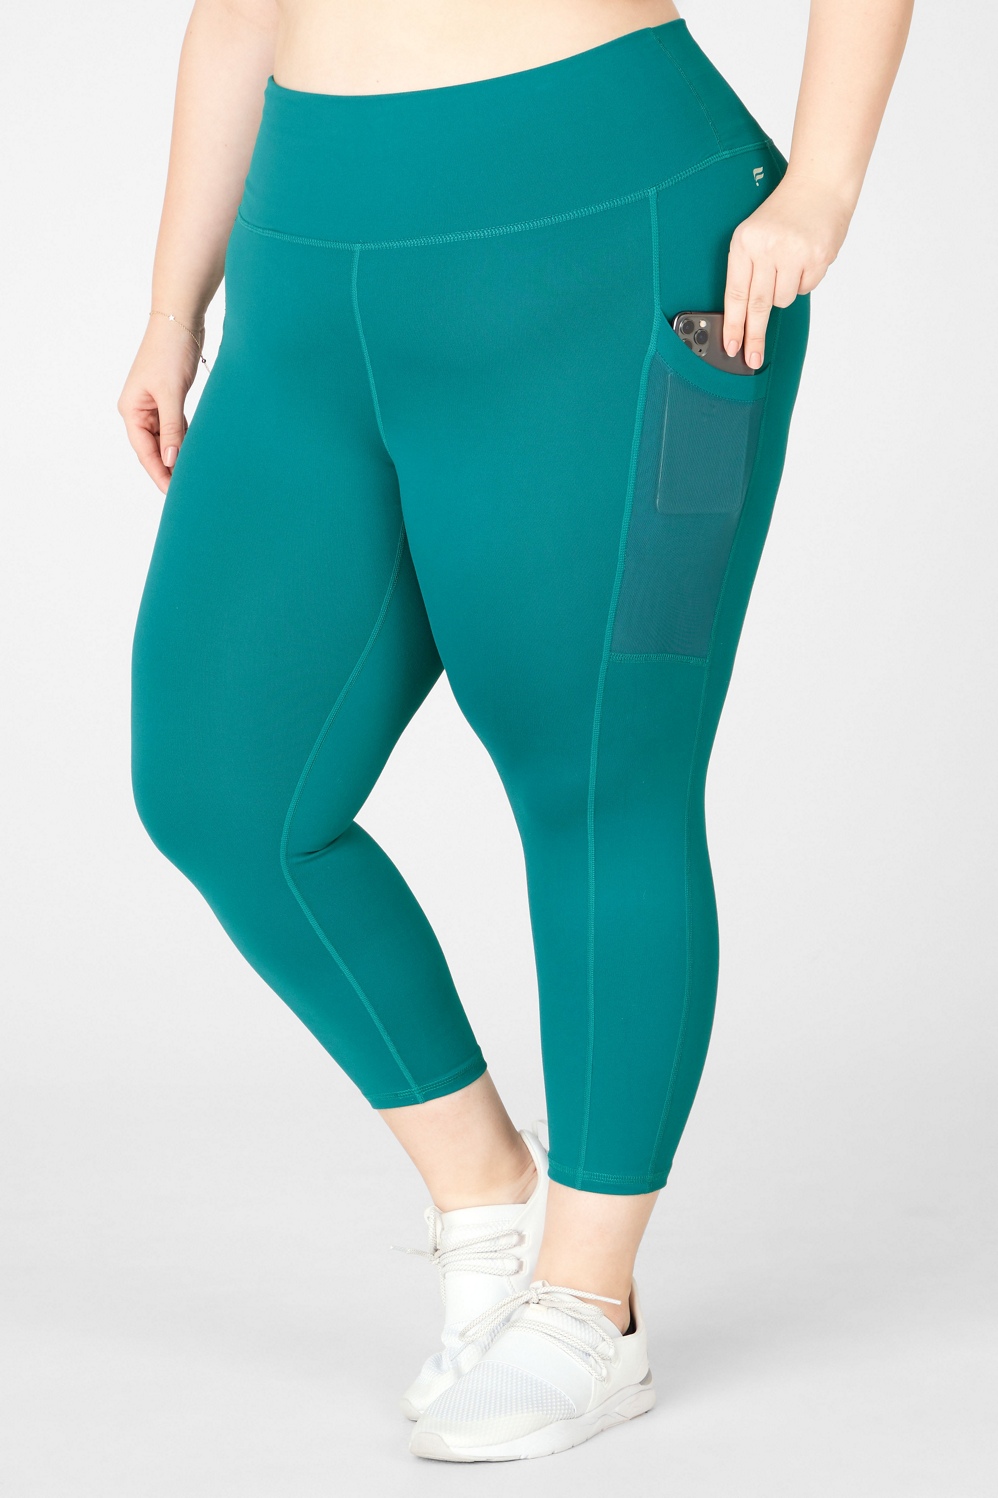 Mila High-Waisted Capri Legging With Pocket in Turquoise